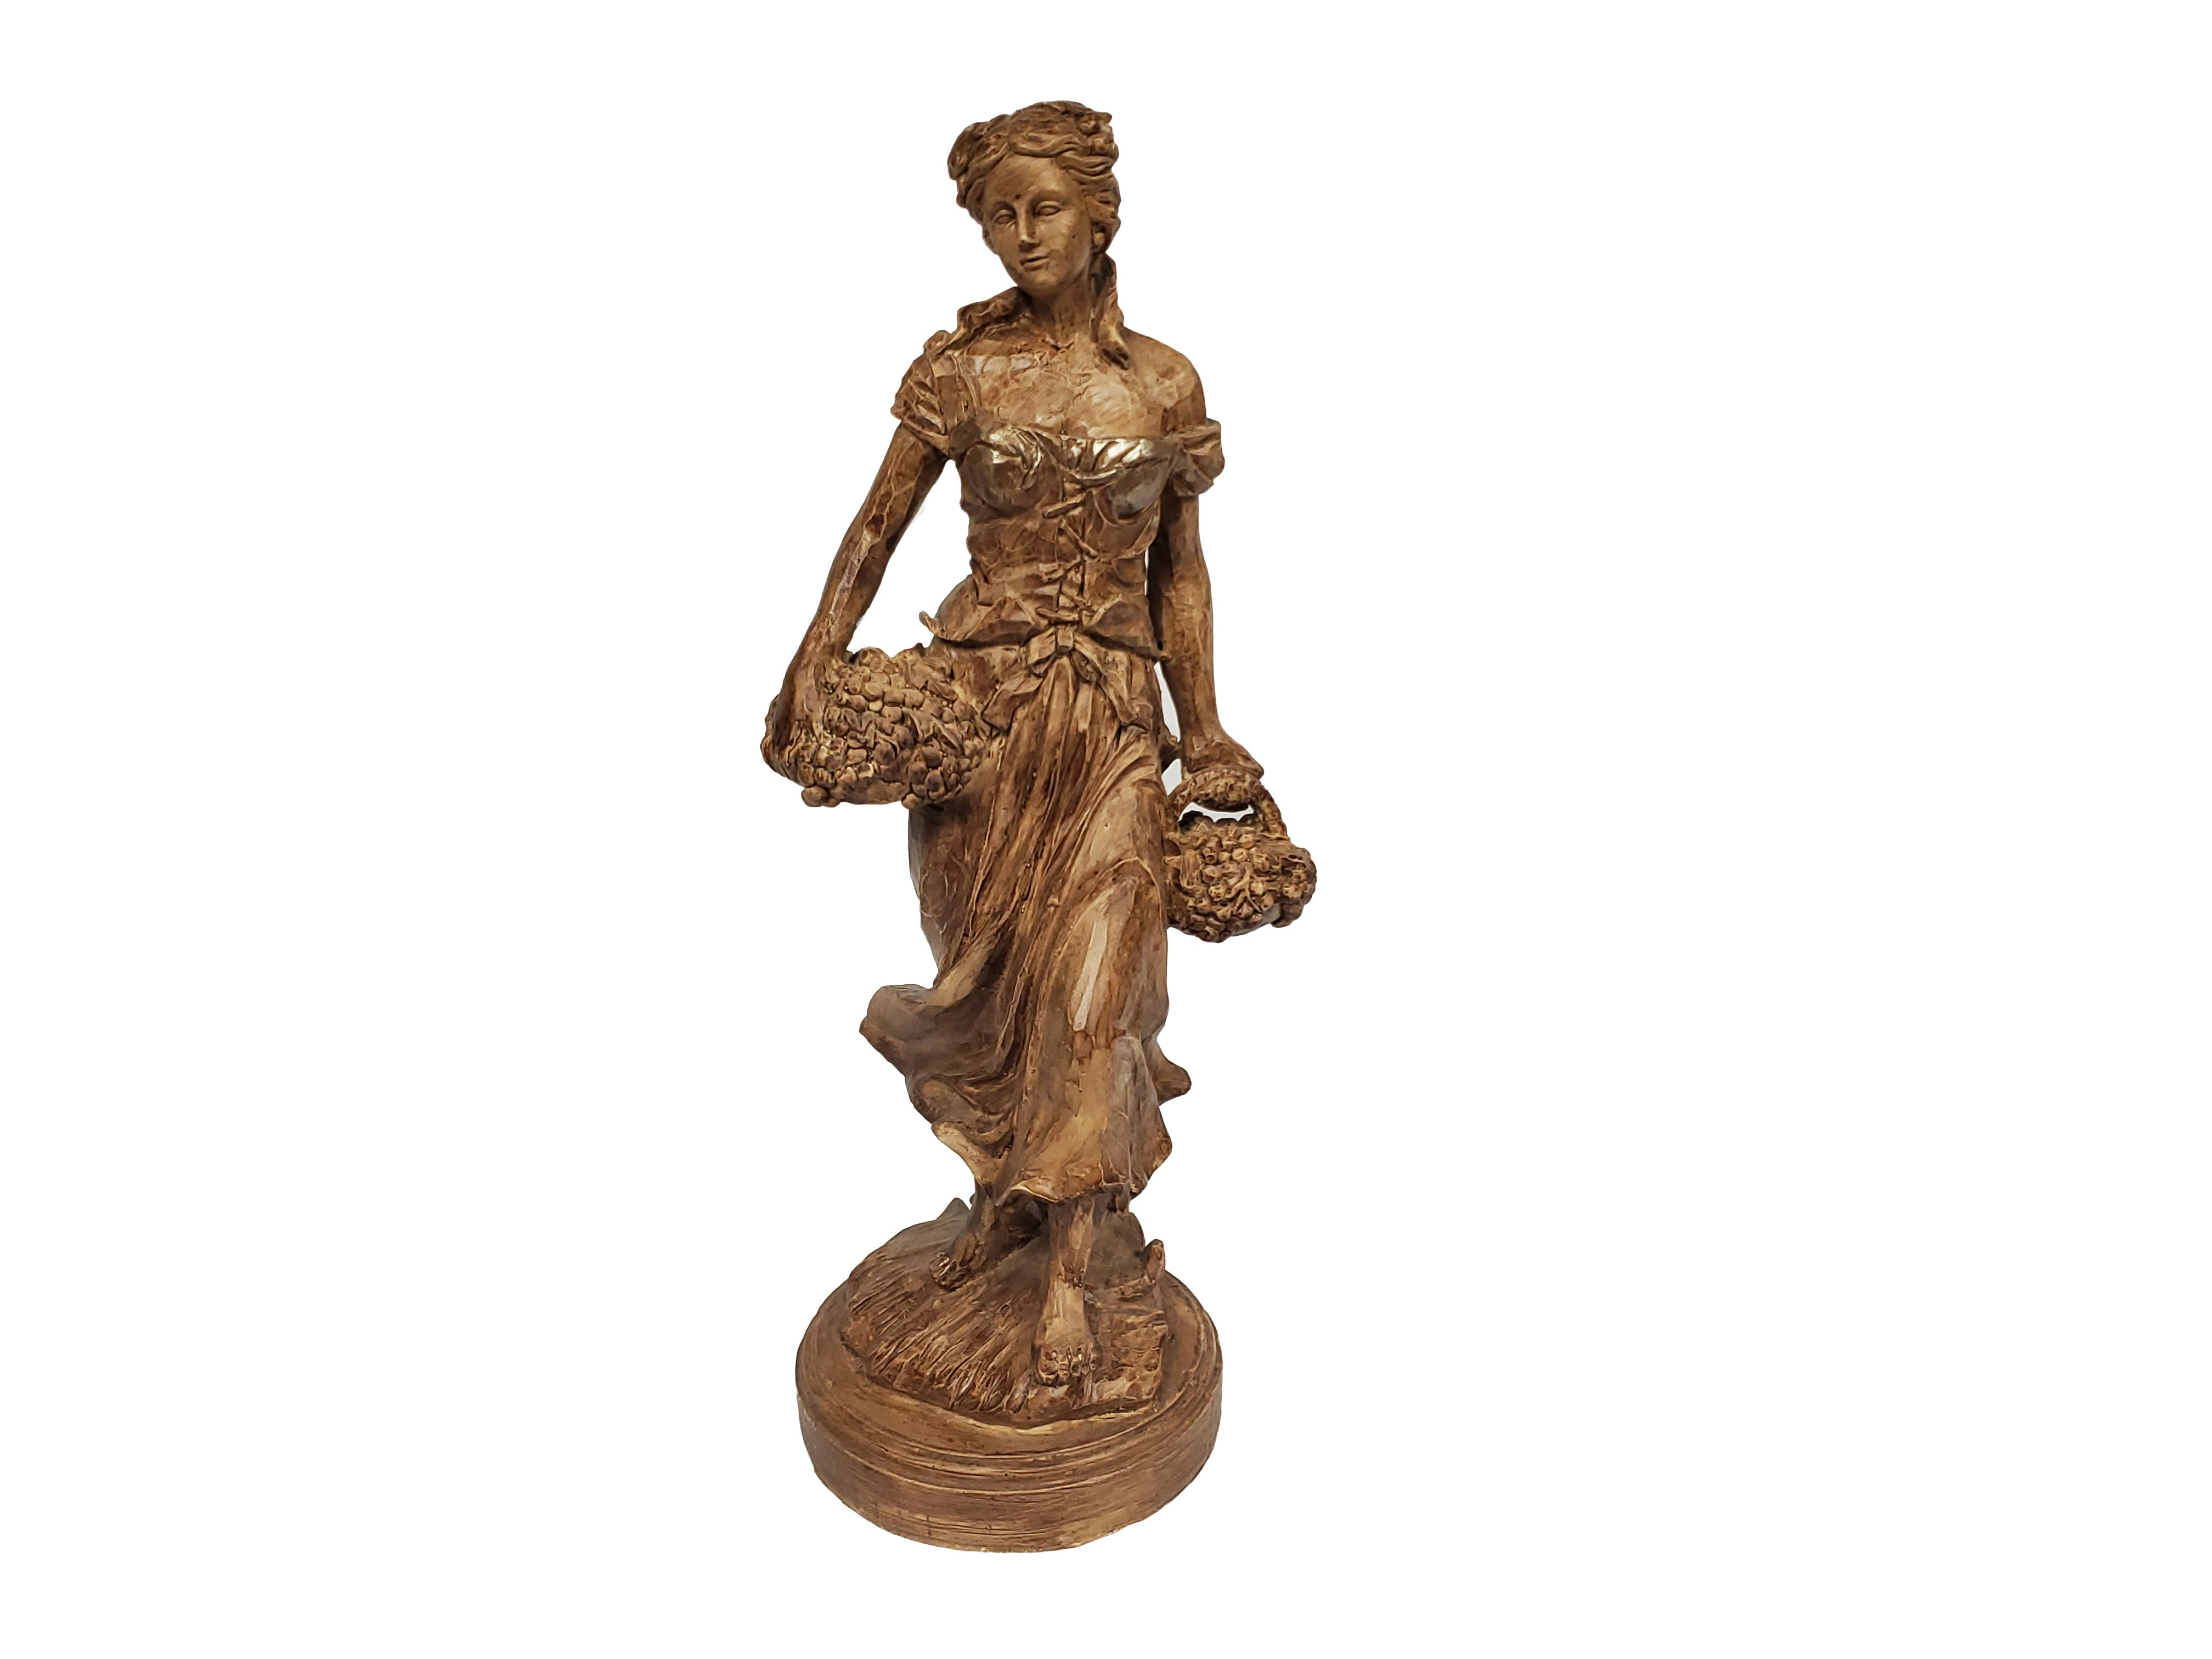 Lady Collecting Flowers Statue "Gabriella" 16"Tall Ceramic - Royal Gift